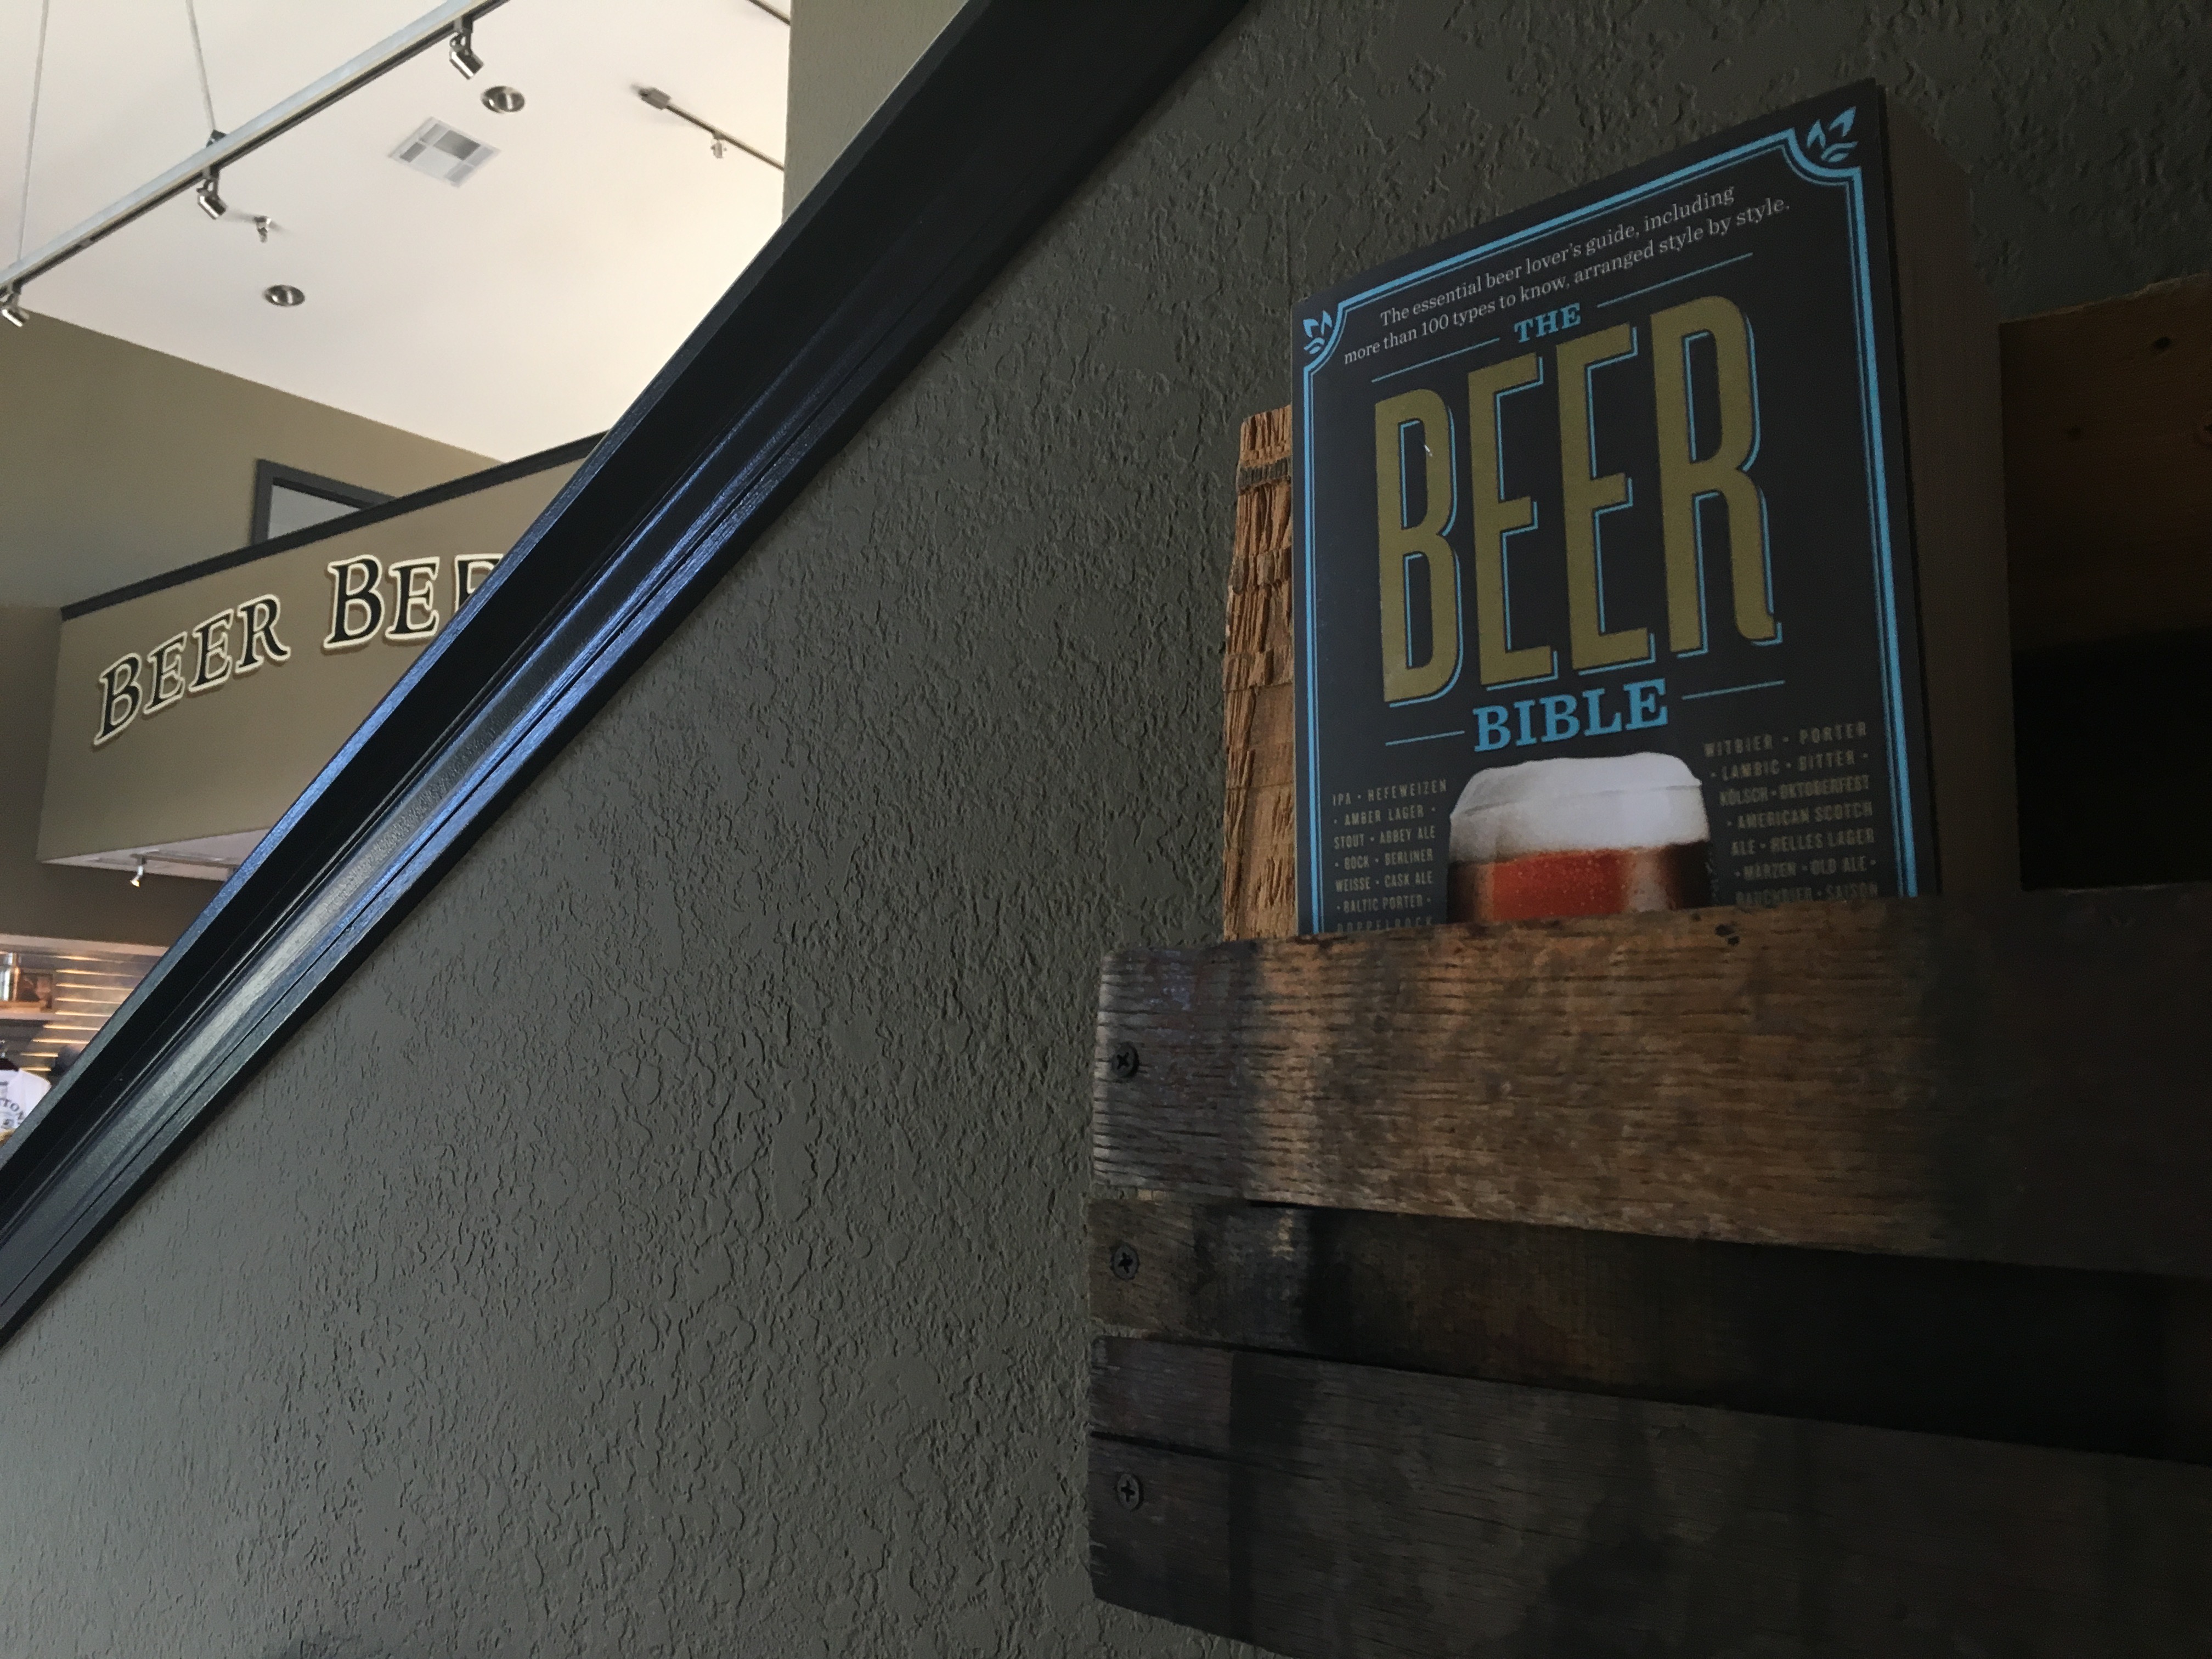 Jeff Alworth's The Beer Bible was spotted for sale inside Firestone Walker's Brewery Emporium Gift Shop.